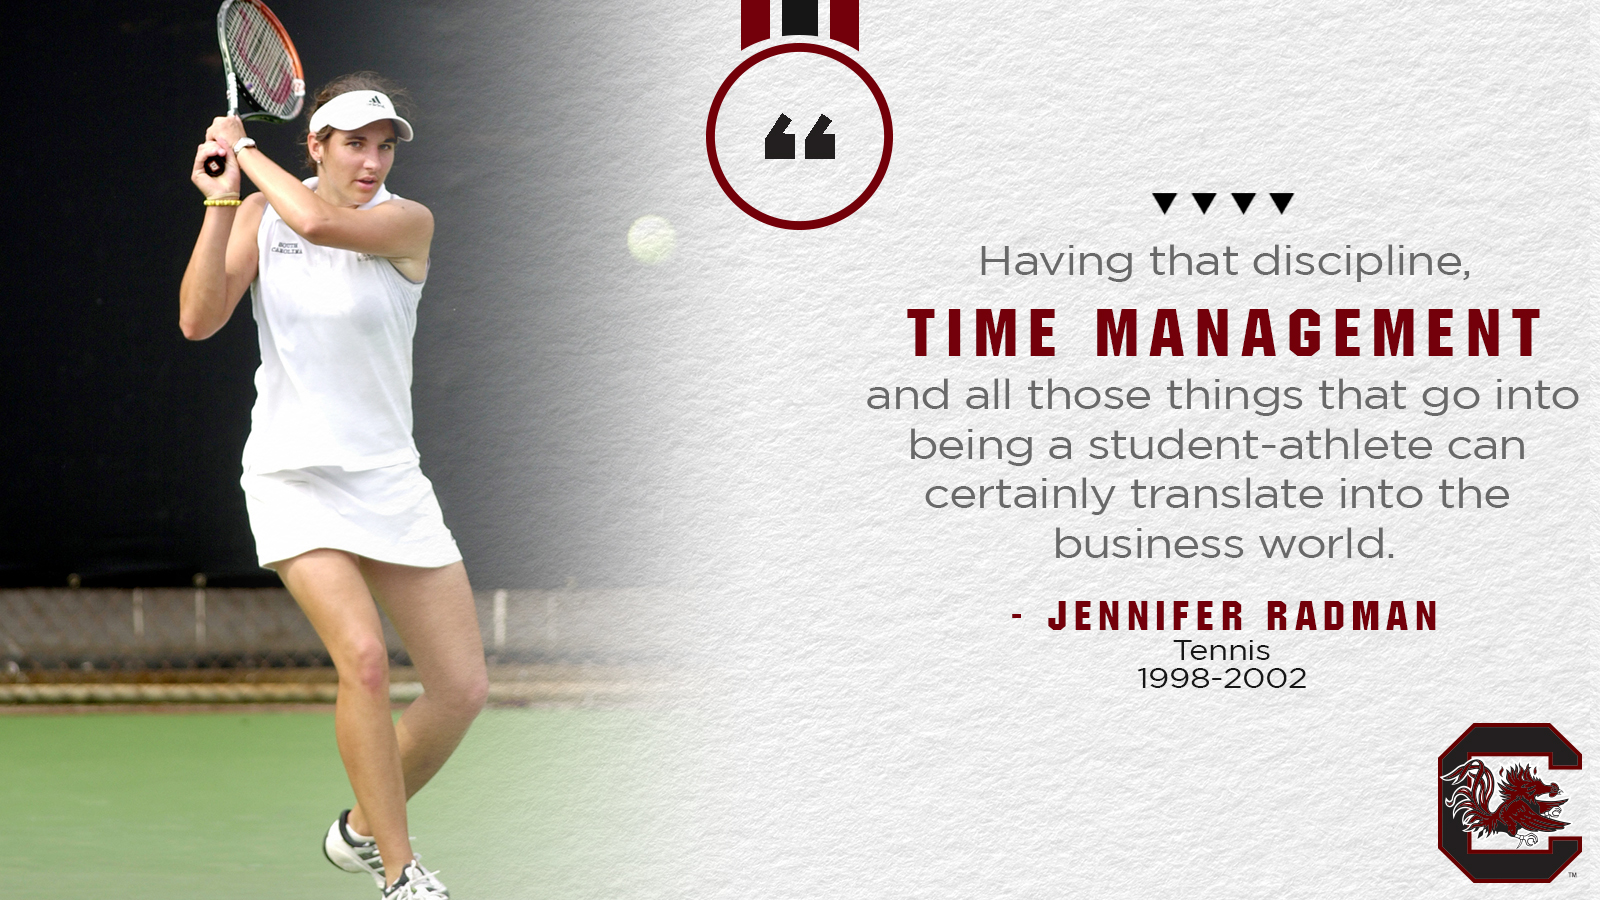 Life as a student-athlete prepped alumna for competitive work environment